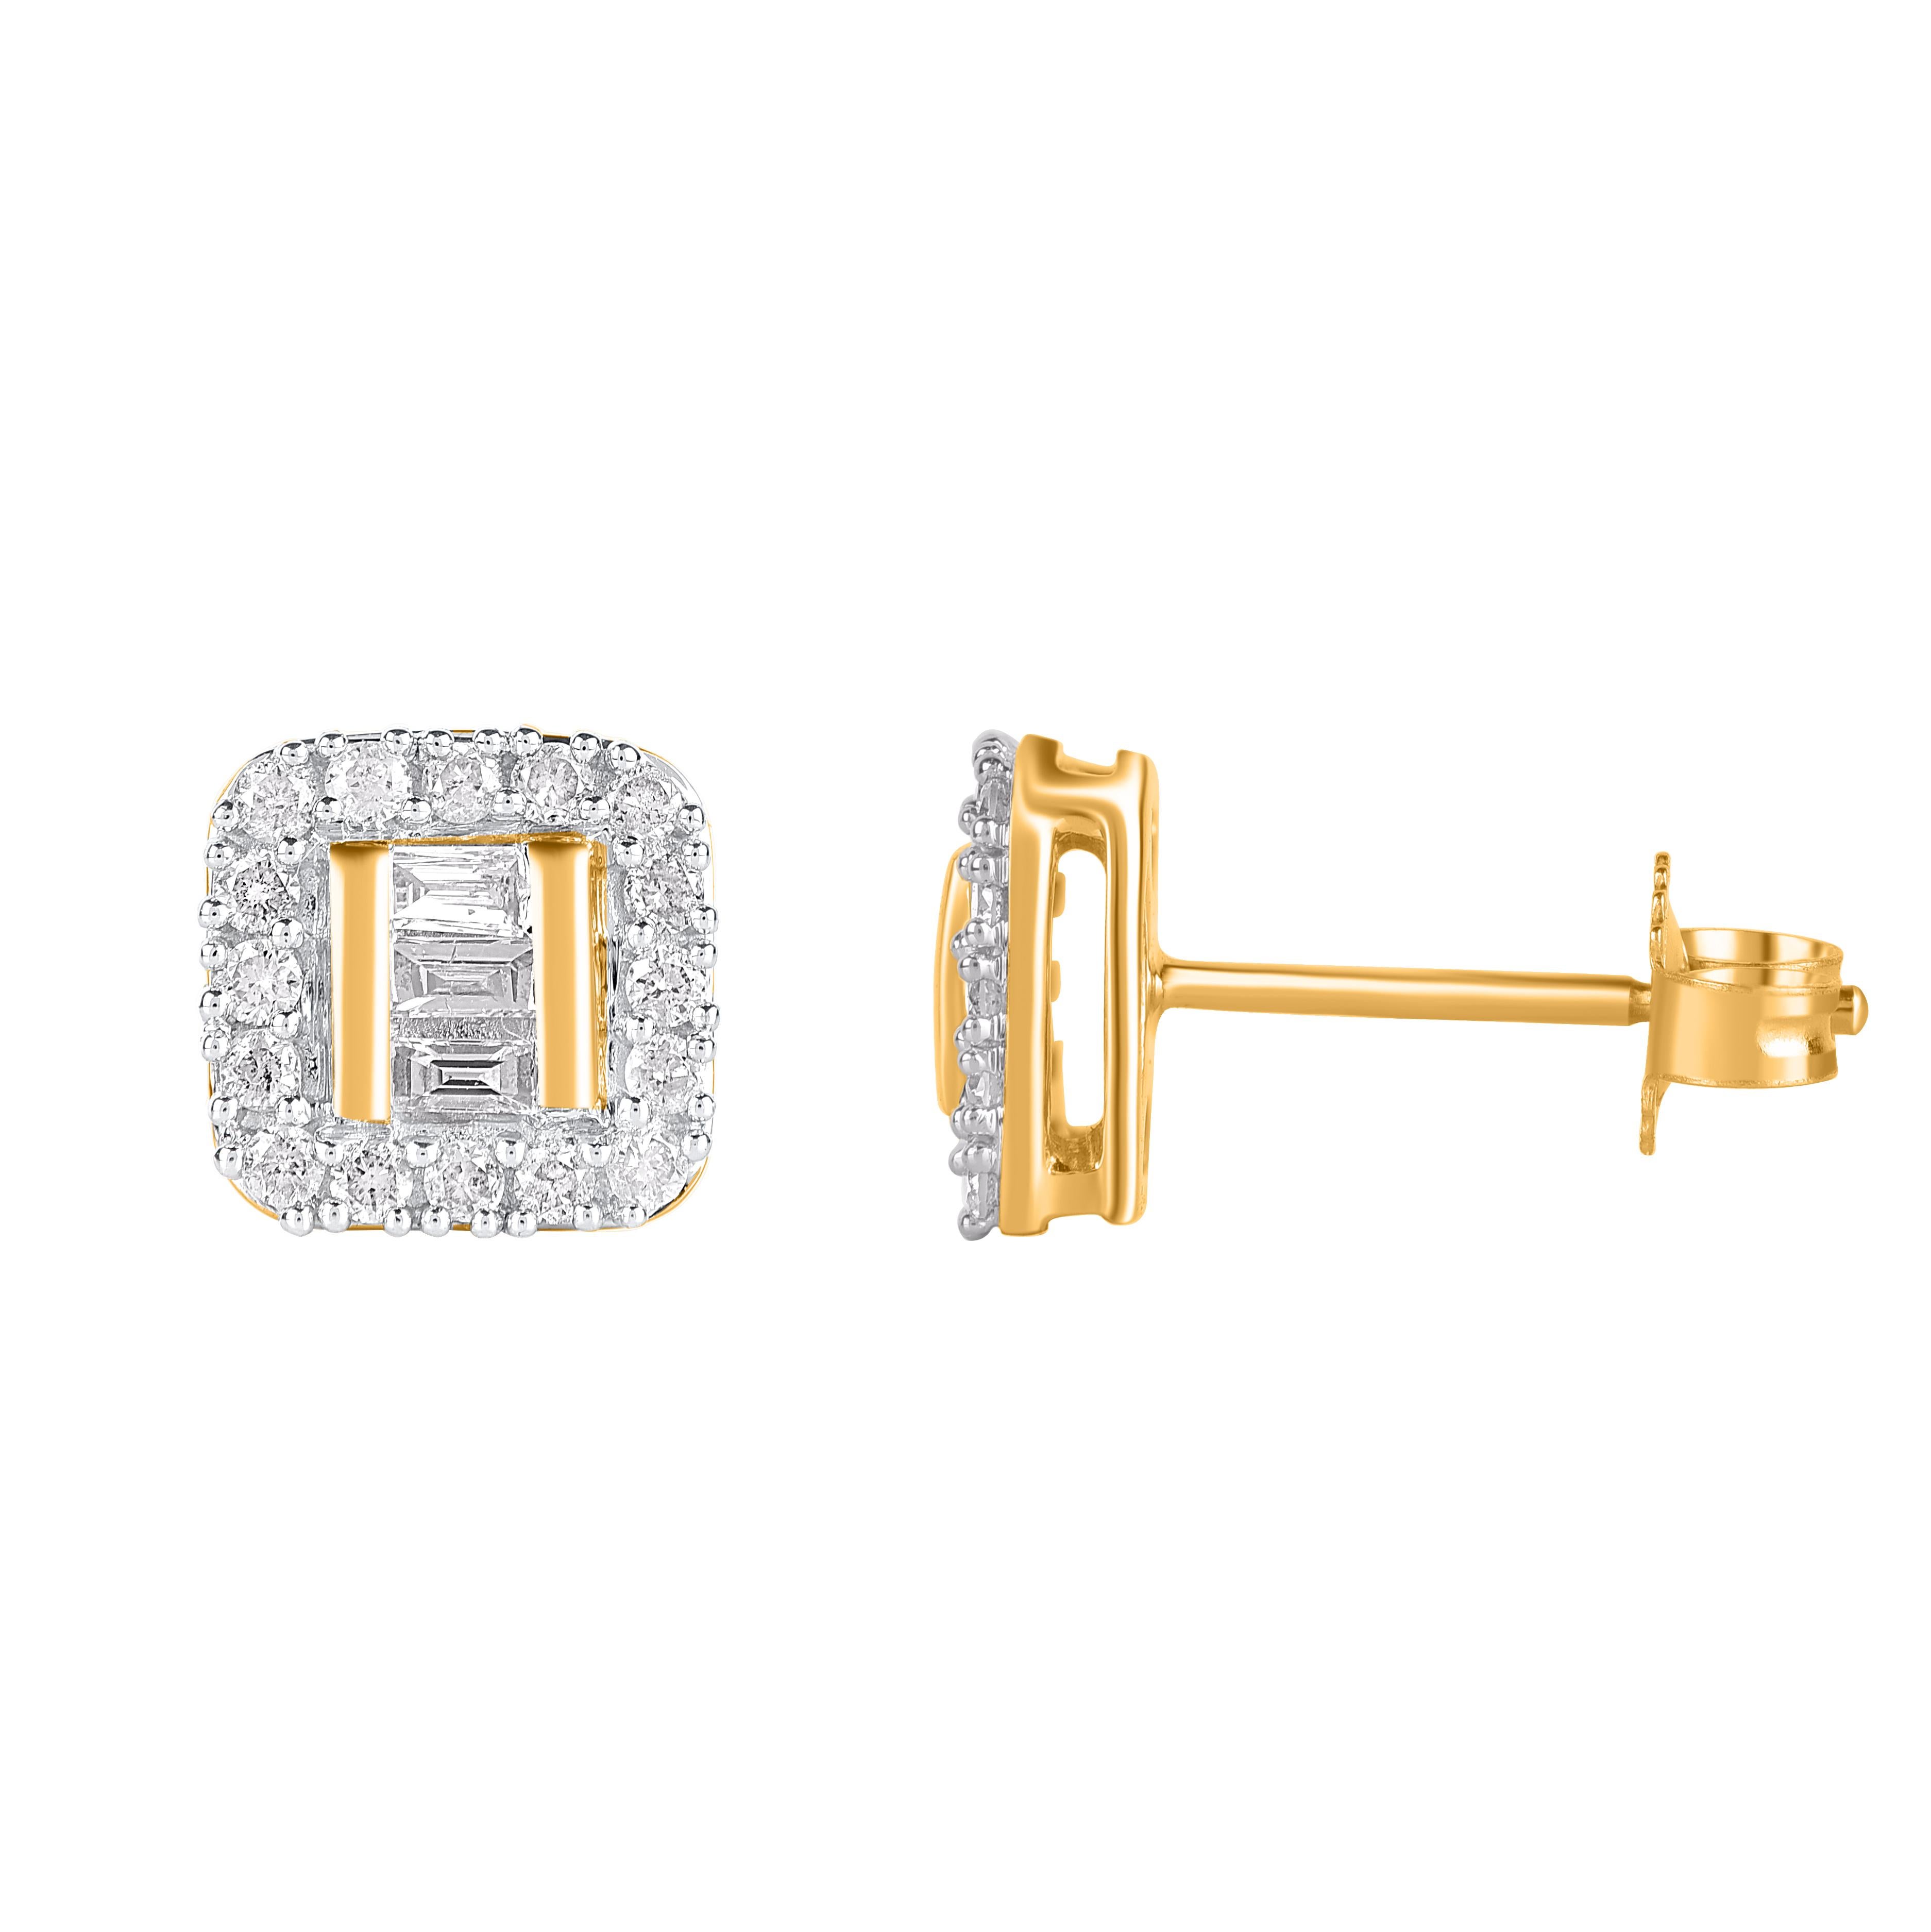 Timeless and elegant, these diamond stud earring are a style you'll wear with every look in your wardrobe. This earring is beautifully designed and studded with 38 natural brilliant cut and baguette cut diamonds set in prong and channel setting. We